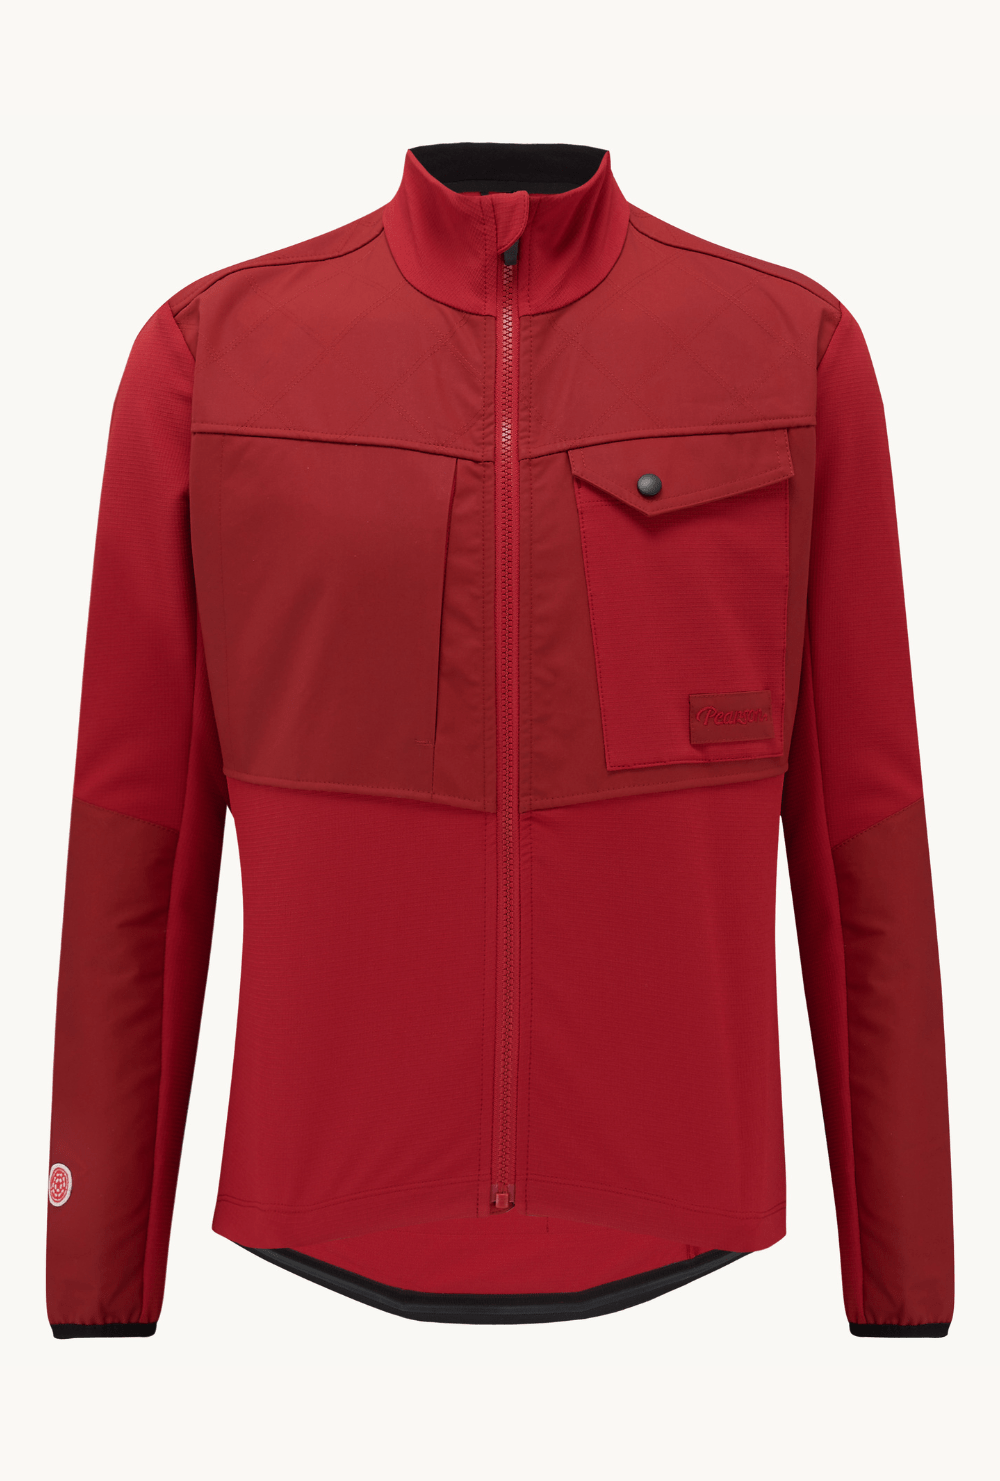 Pearson 1860  Because Its There - Red Adventure Long Sleeve Cycling Jacket  Cherry Red / Xx-large